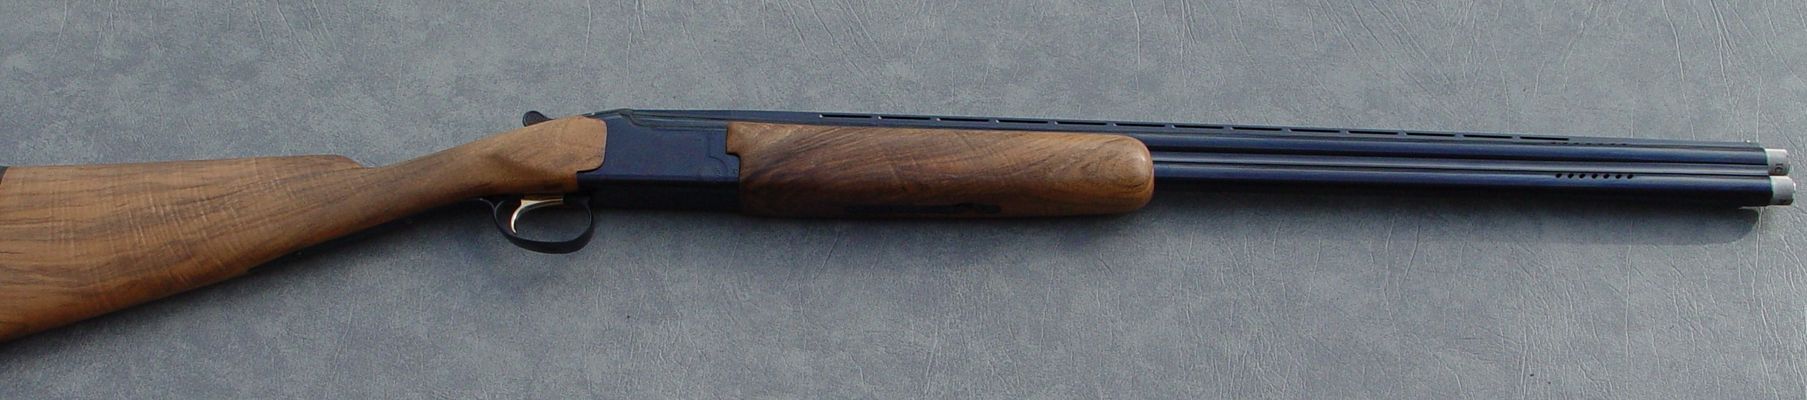 20 ga Browning Citori After
This is the same 20 ga with a AAA grade Fancy Franquette (English Walnut) stock, in an English or field configuration with a long triggerguard, a Limbsaver pad and completely refinished to original Browning polish. All work by myself, including the stock. Stock is from one of my AAA blanks.
